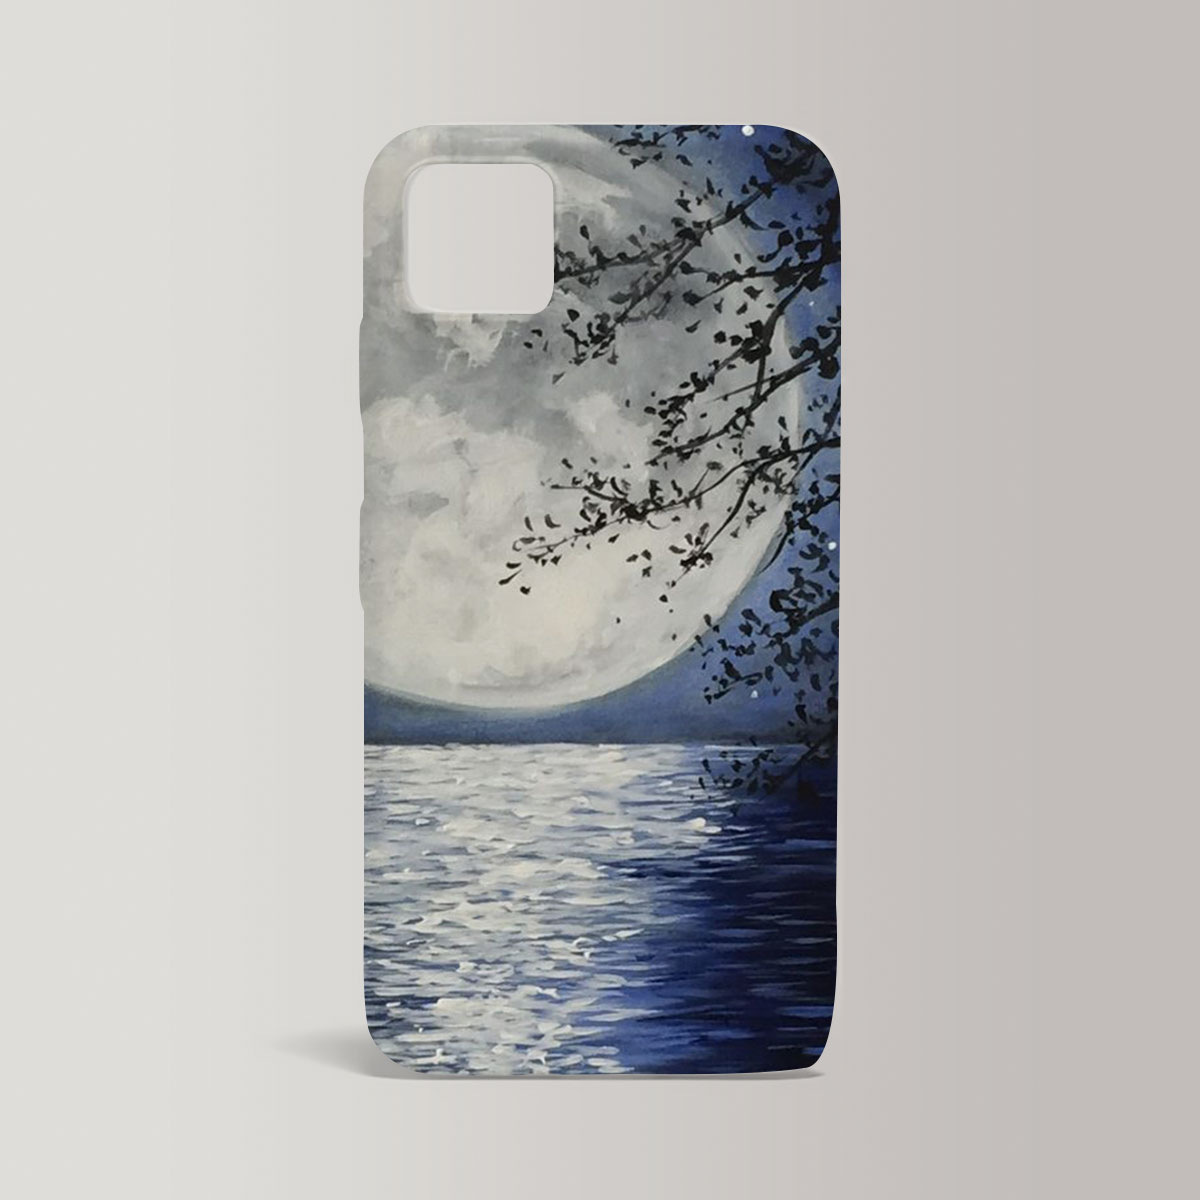 Moon River Iphone Case